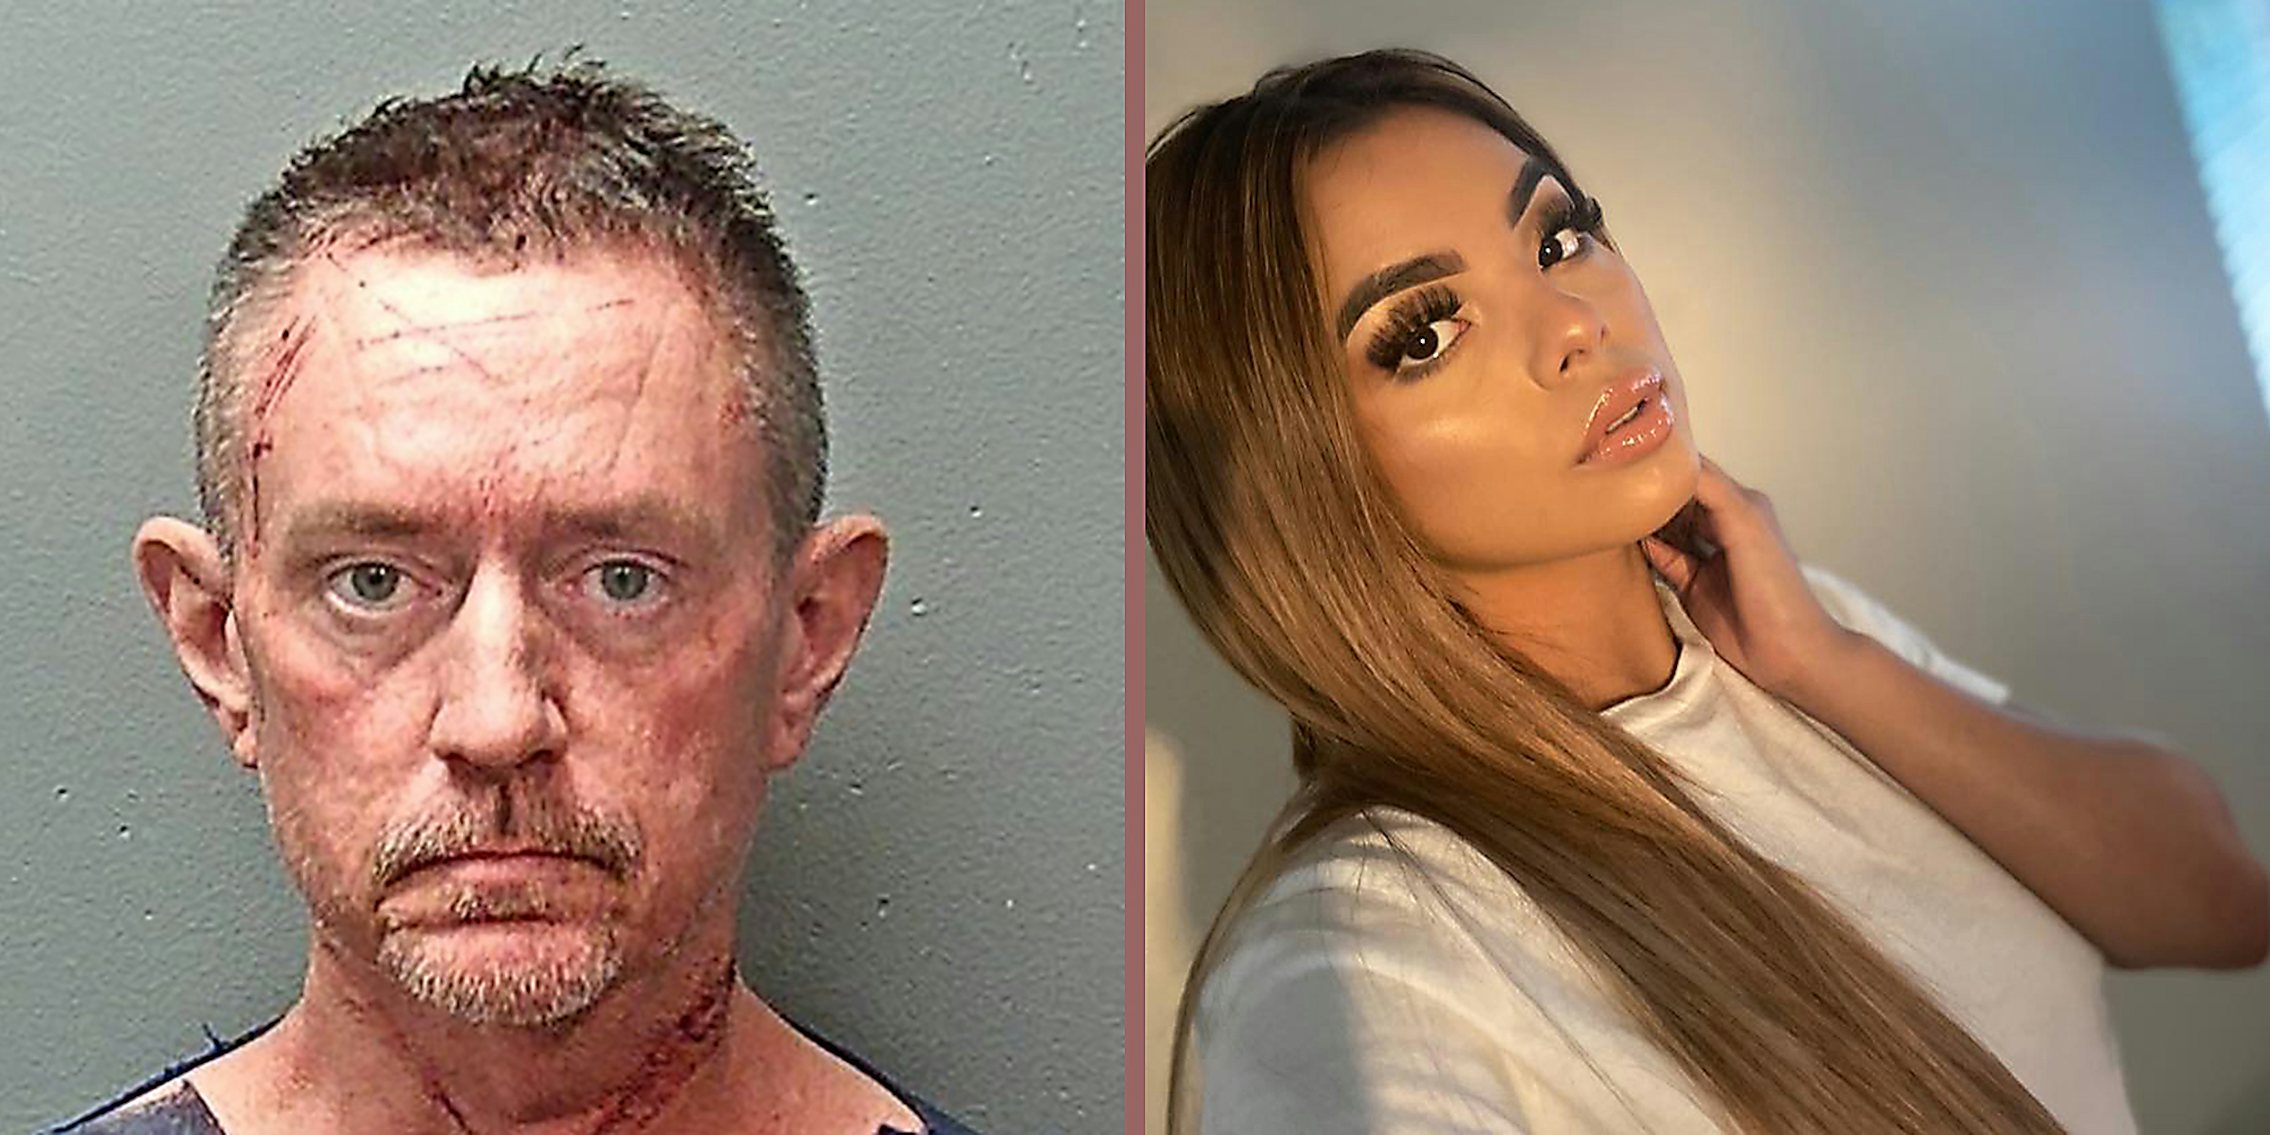 A man in prison looking into camera (L) and a woman posing for the camera (R).